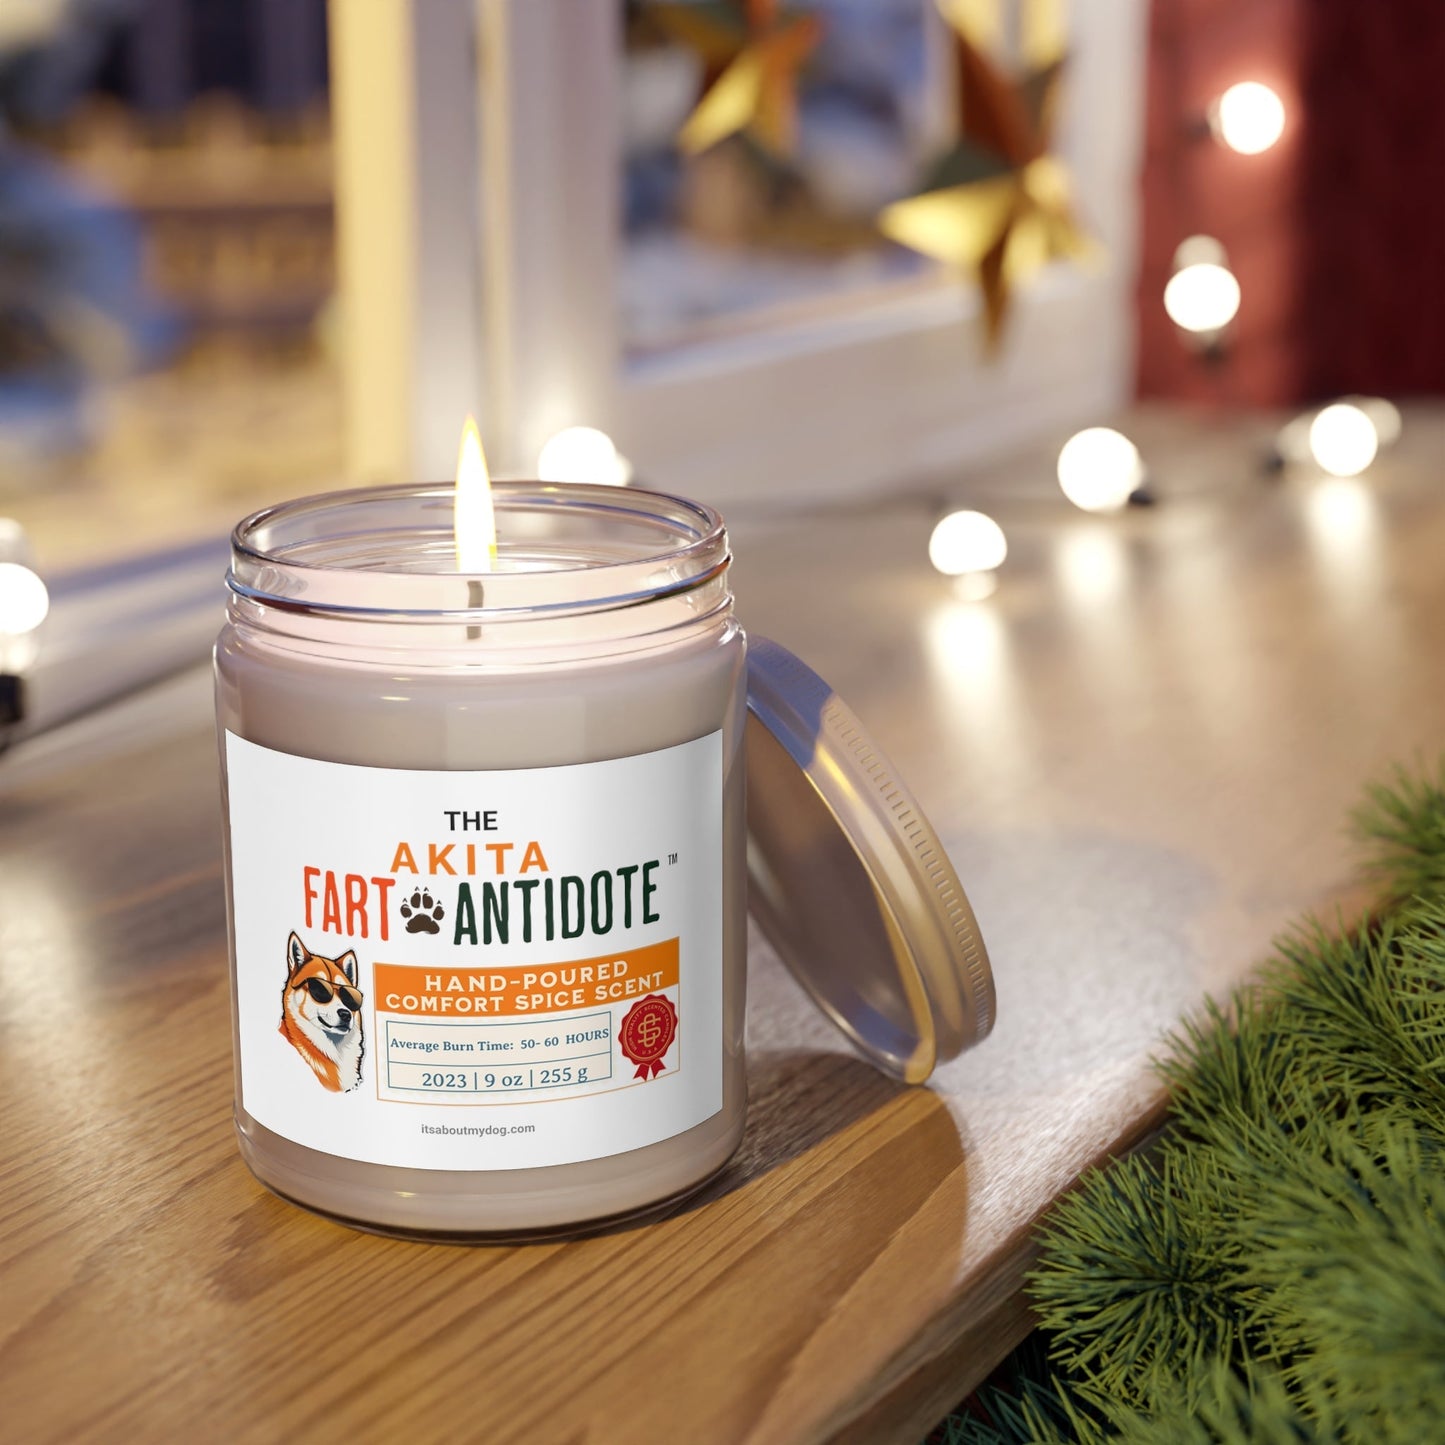 Akita- Dog Fart Antidote-9oz Scented Candle24.99-(FREE Delivery) Shop now at itsaboutmydog.com, dog fart candle, gifts for dog walkers, light me when the dog farts candle, personalised dog gifts, sorry my dog farted candle